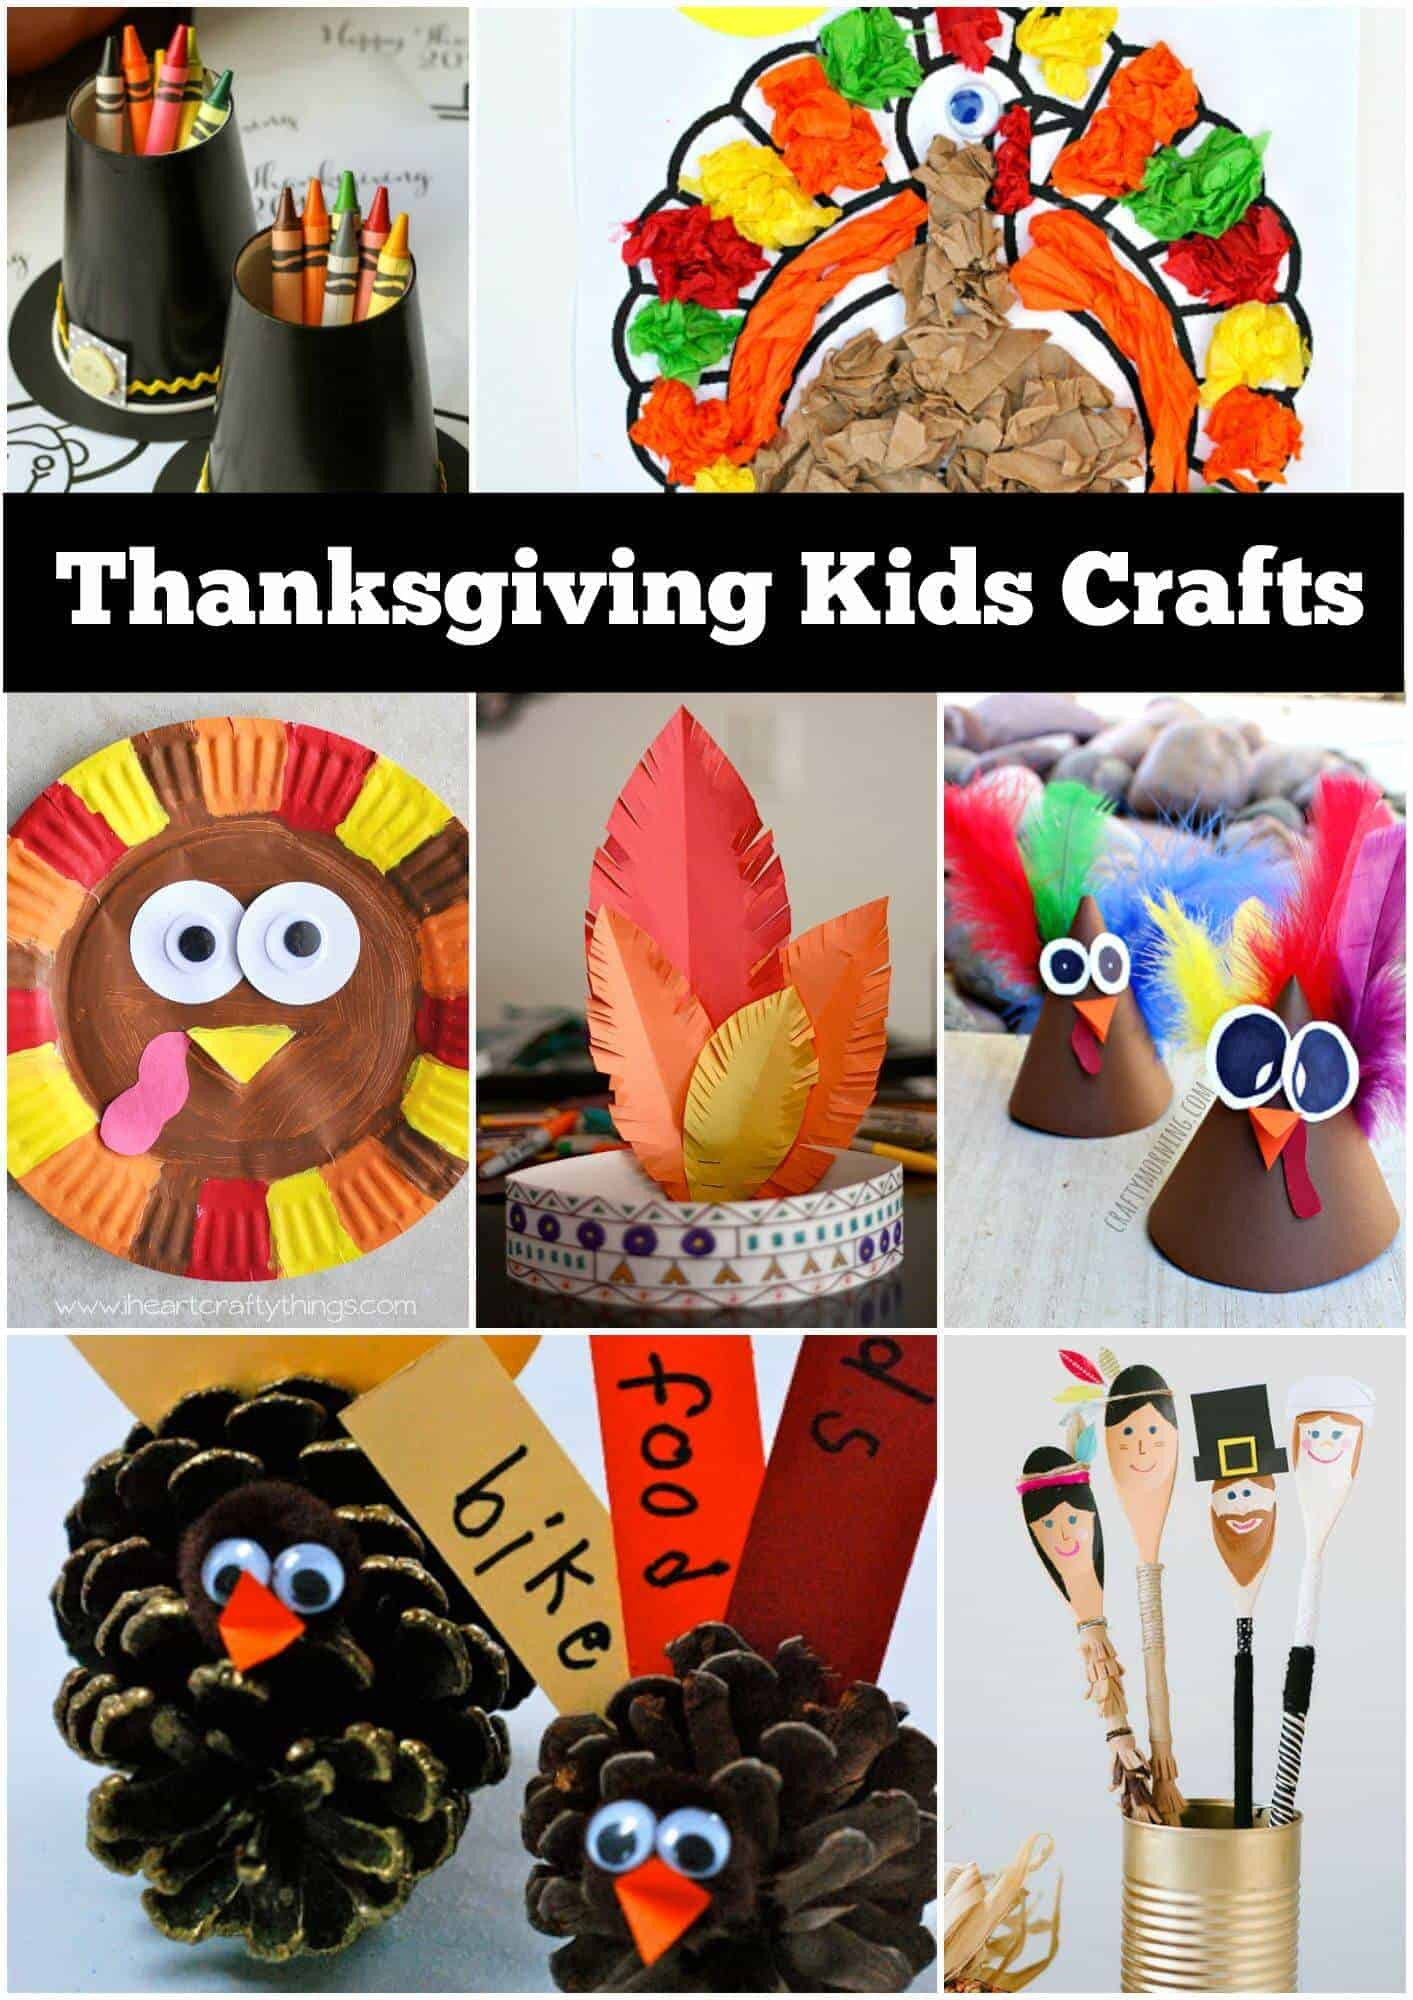 Pilgrim Crafts For Kids
 12 Thanksgiving Craft Ideas for kids Page 2 of 2